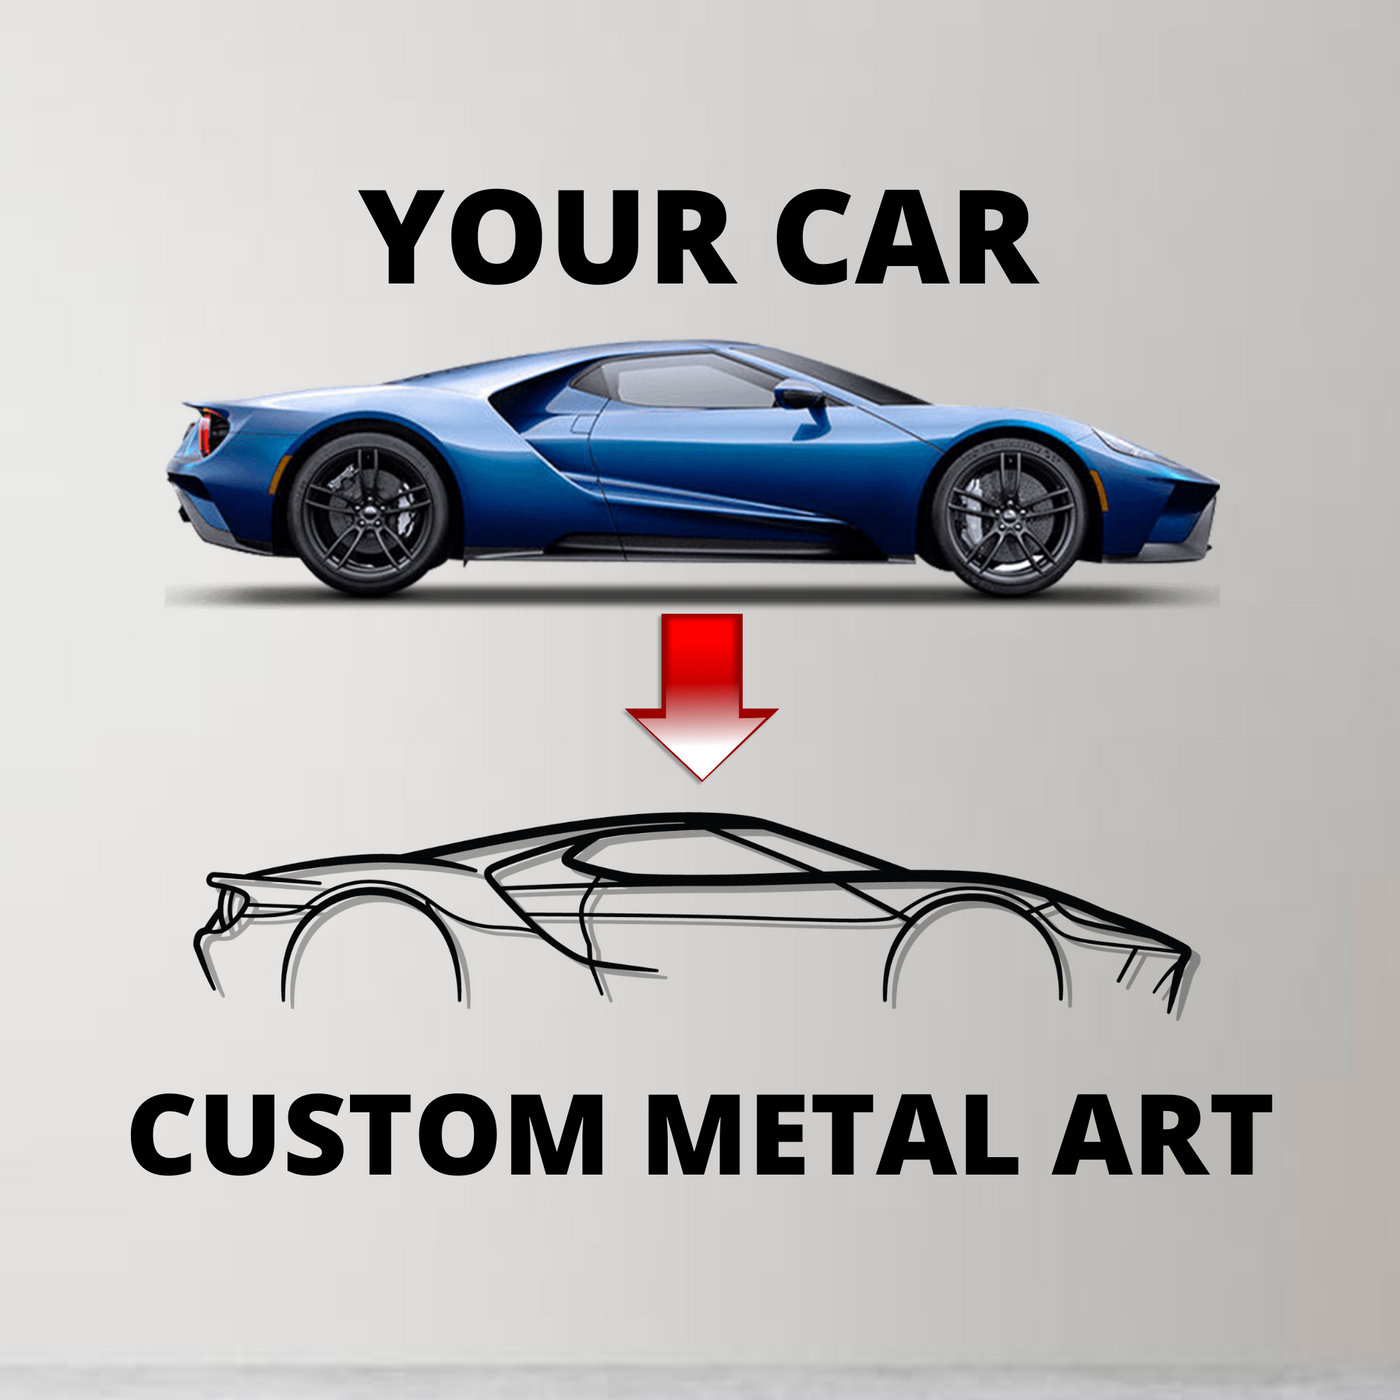 RS5 Coupe 2022 Detailed Silhouette Metal Wall Art